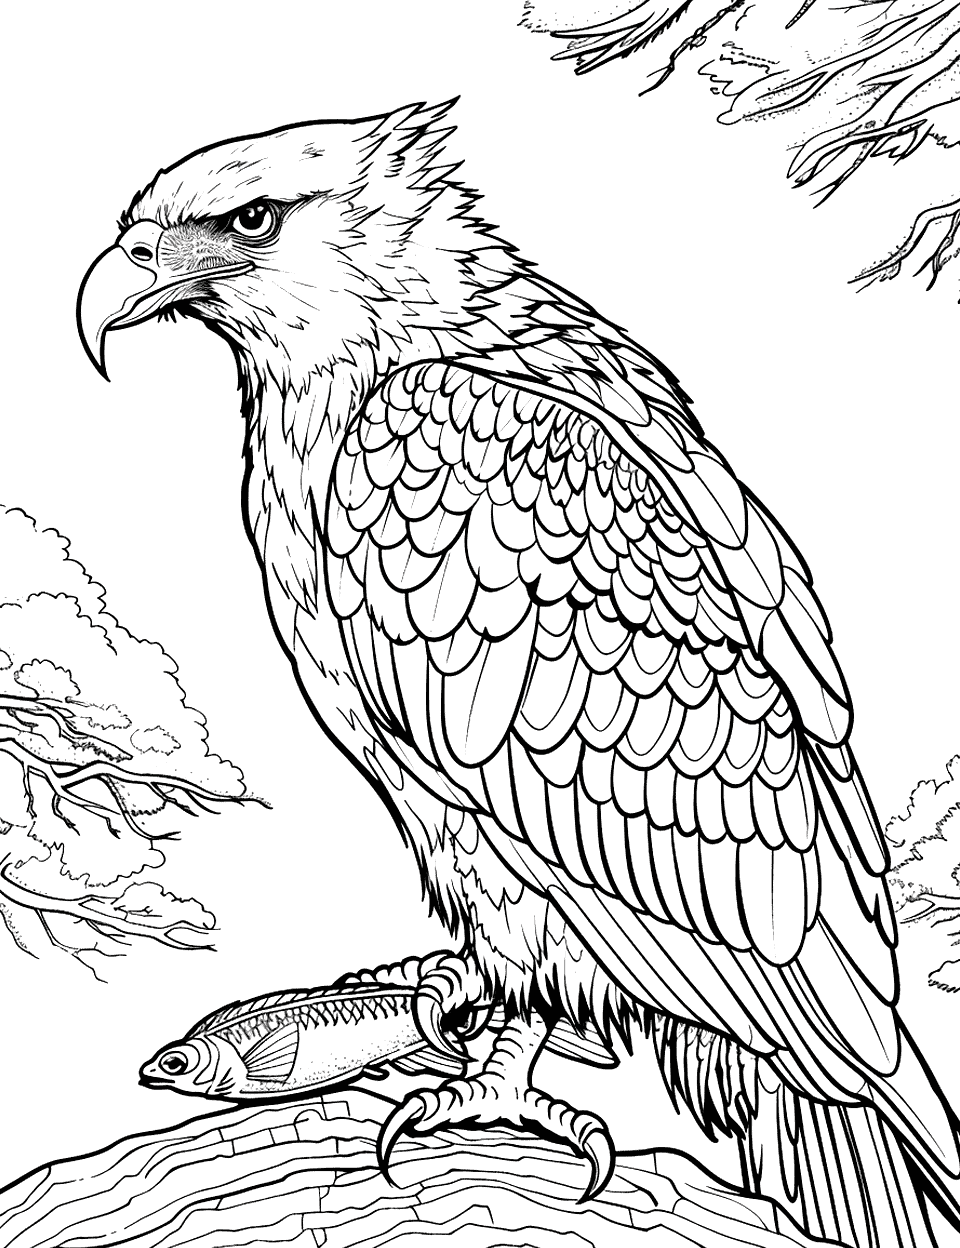 Fierce Harpy Eagle with Prey Coloring Page - A harpy eagle clutches a small fish in its talons, standing on a rock with a minimal forest background.